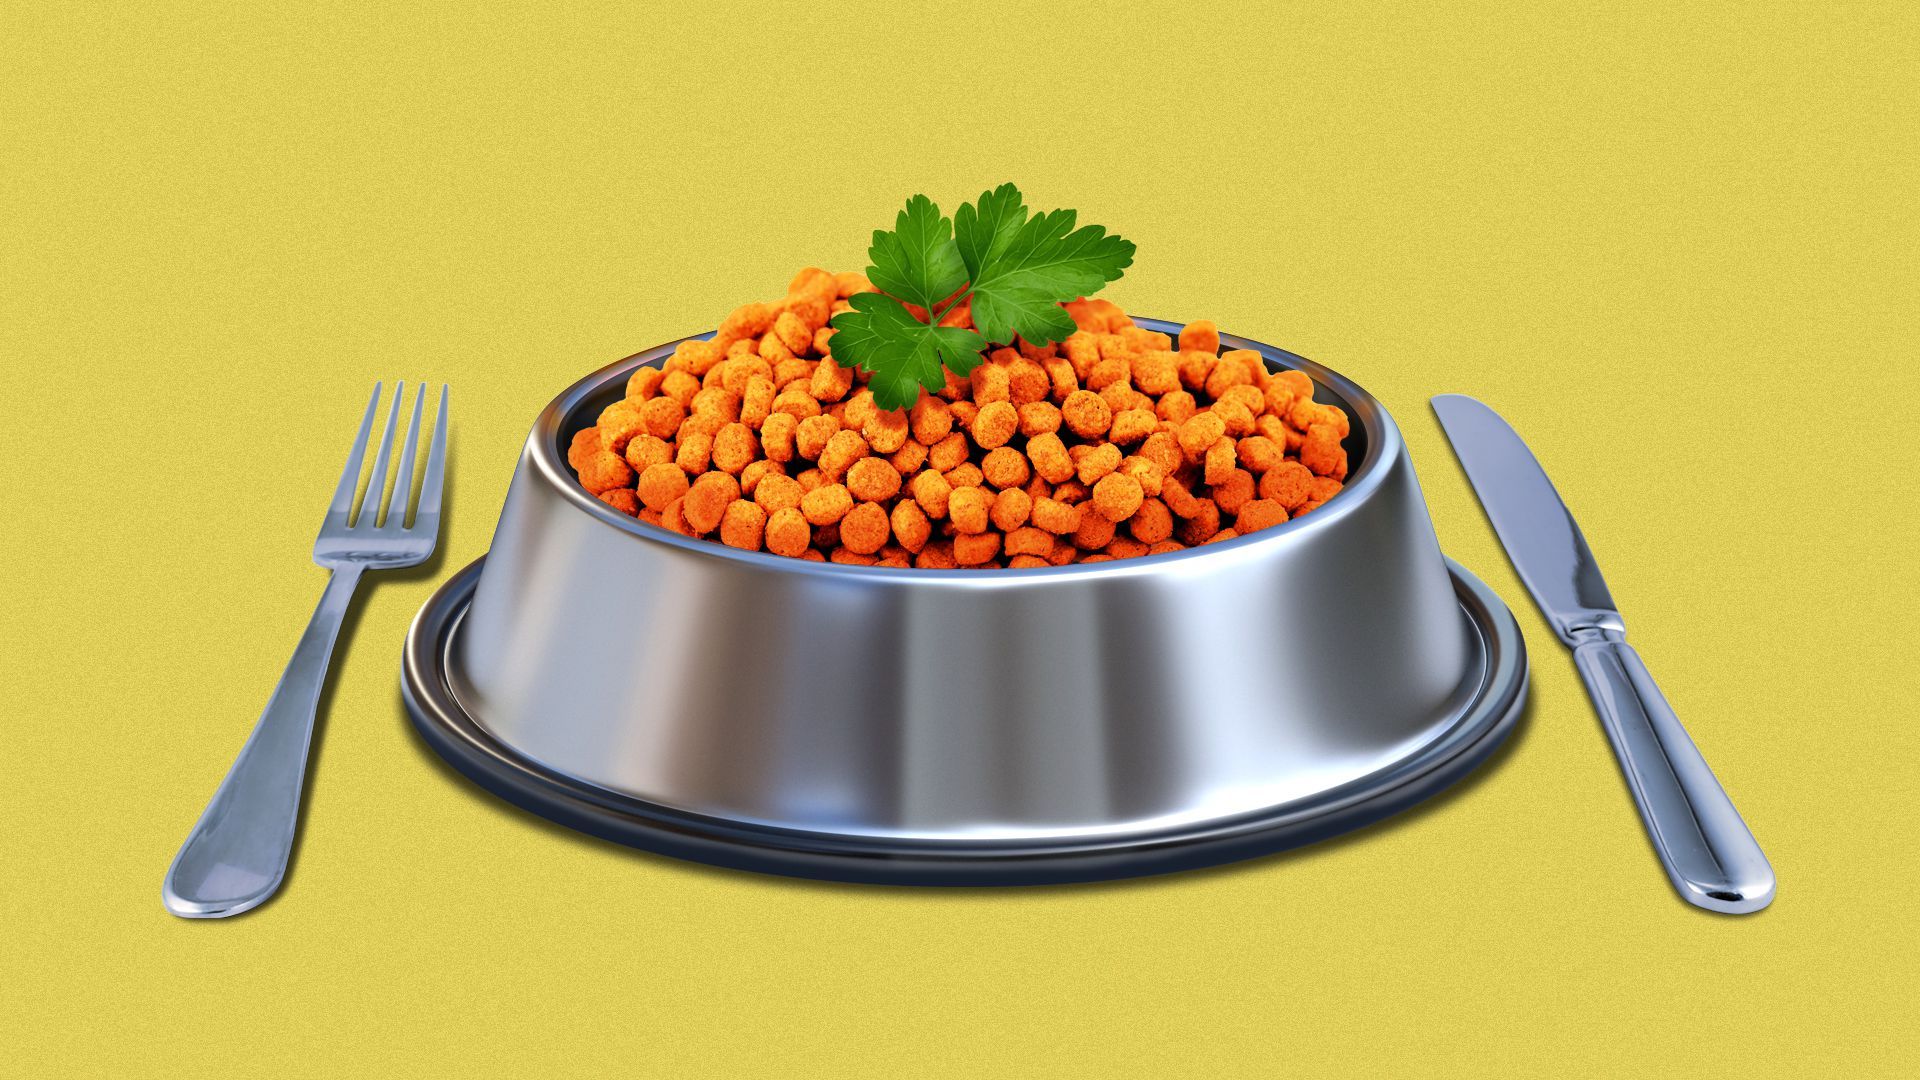 Illustration of a bowl of pet food with a knife and fork on either side